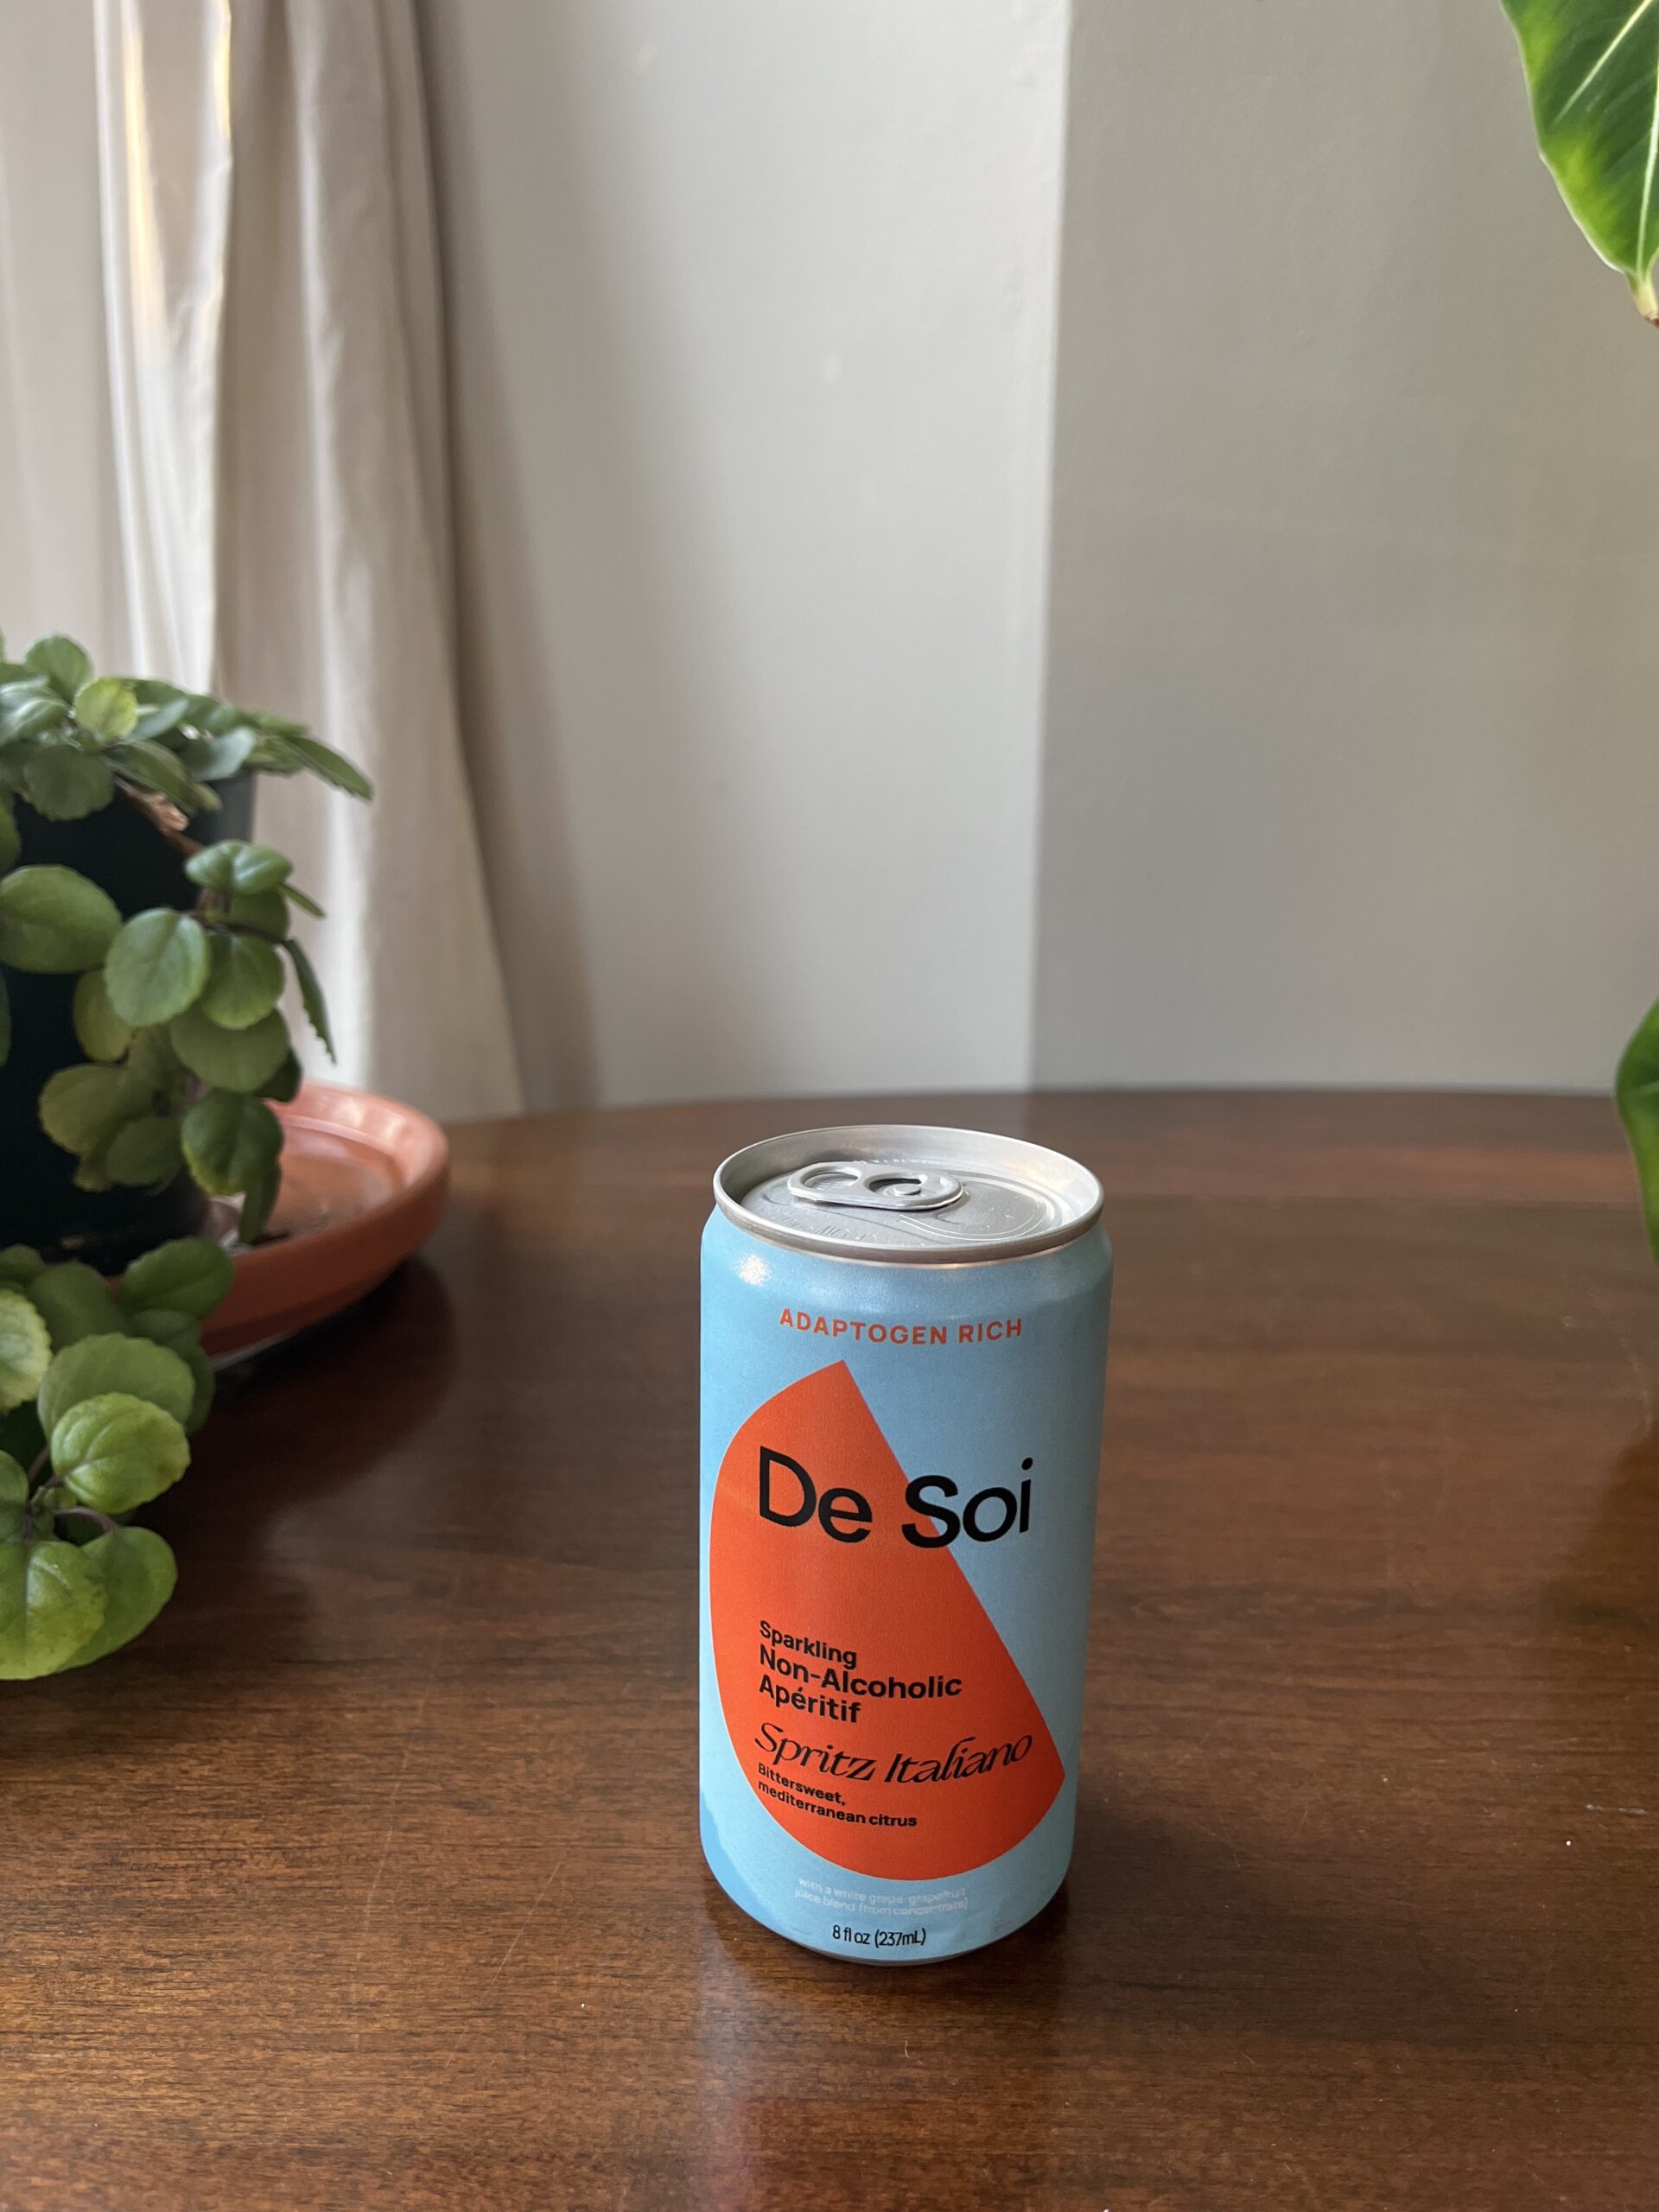 A can of De Soi Sparkling Non-Alcoholic Aperitif sits on a wooden table next to a plant.